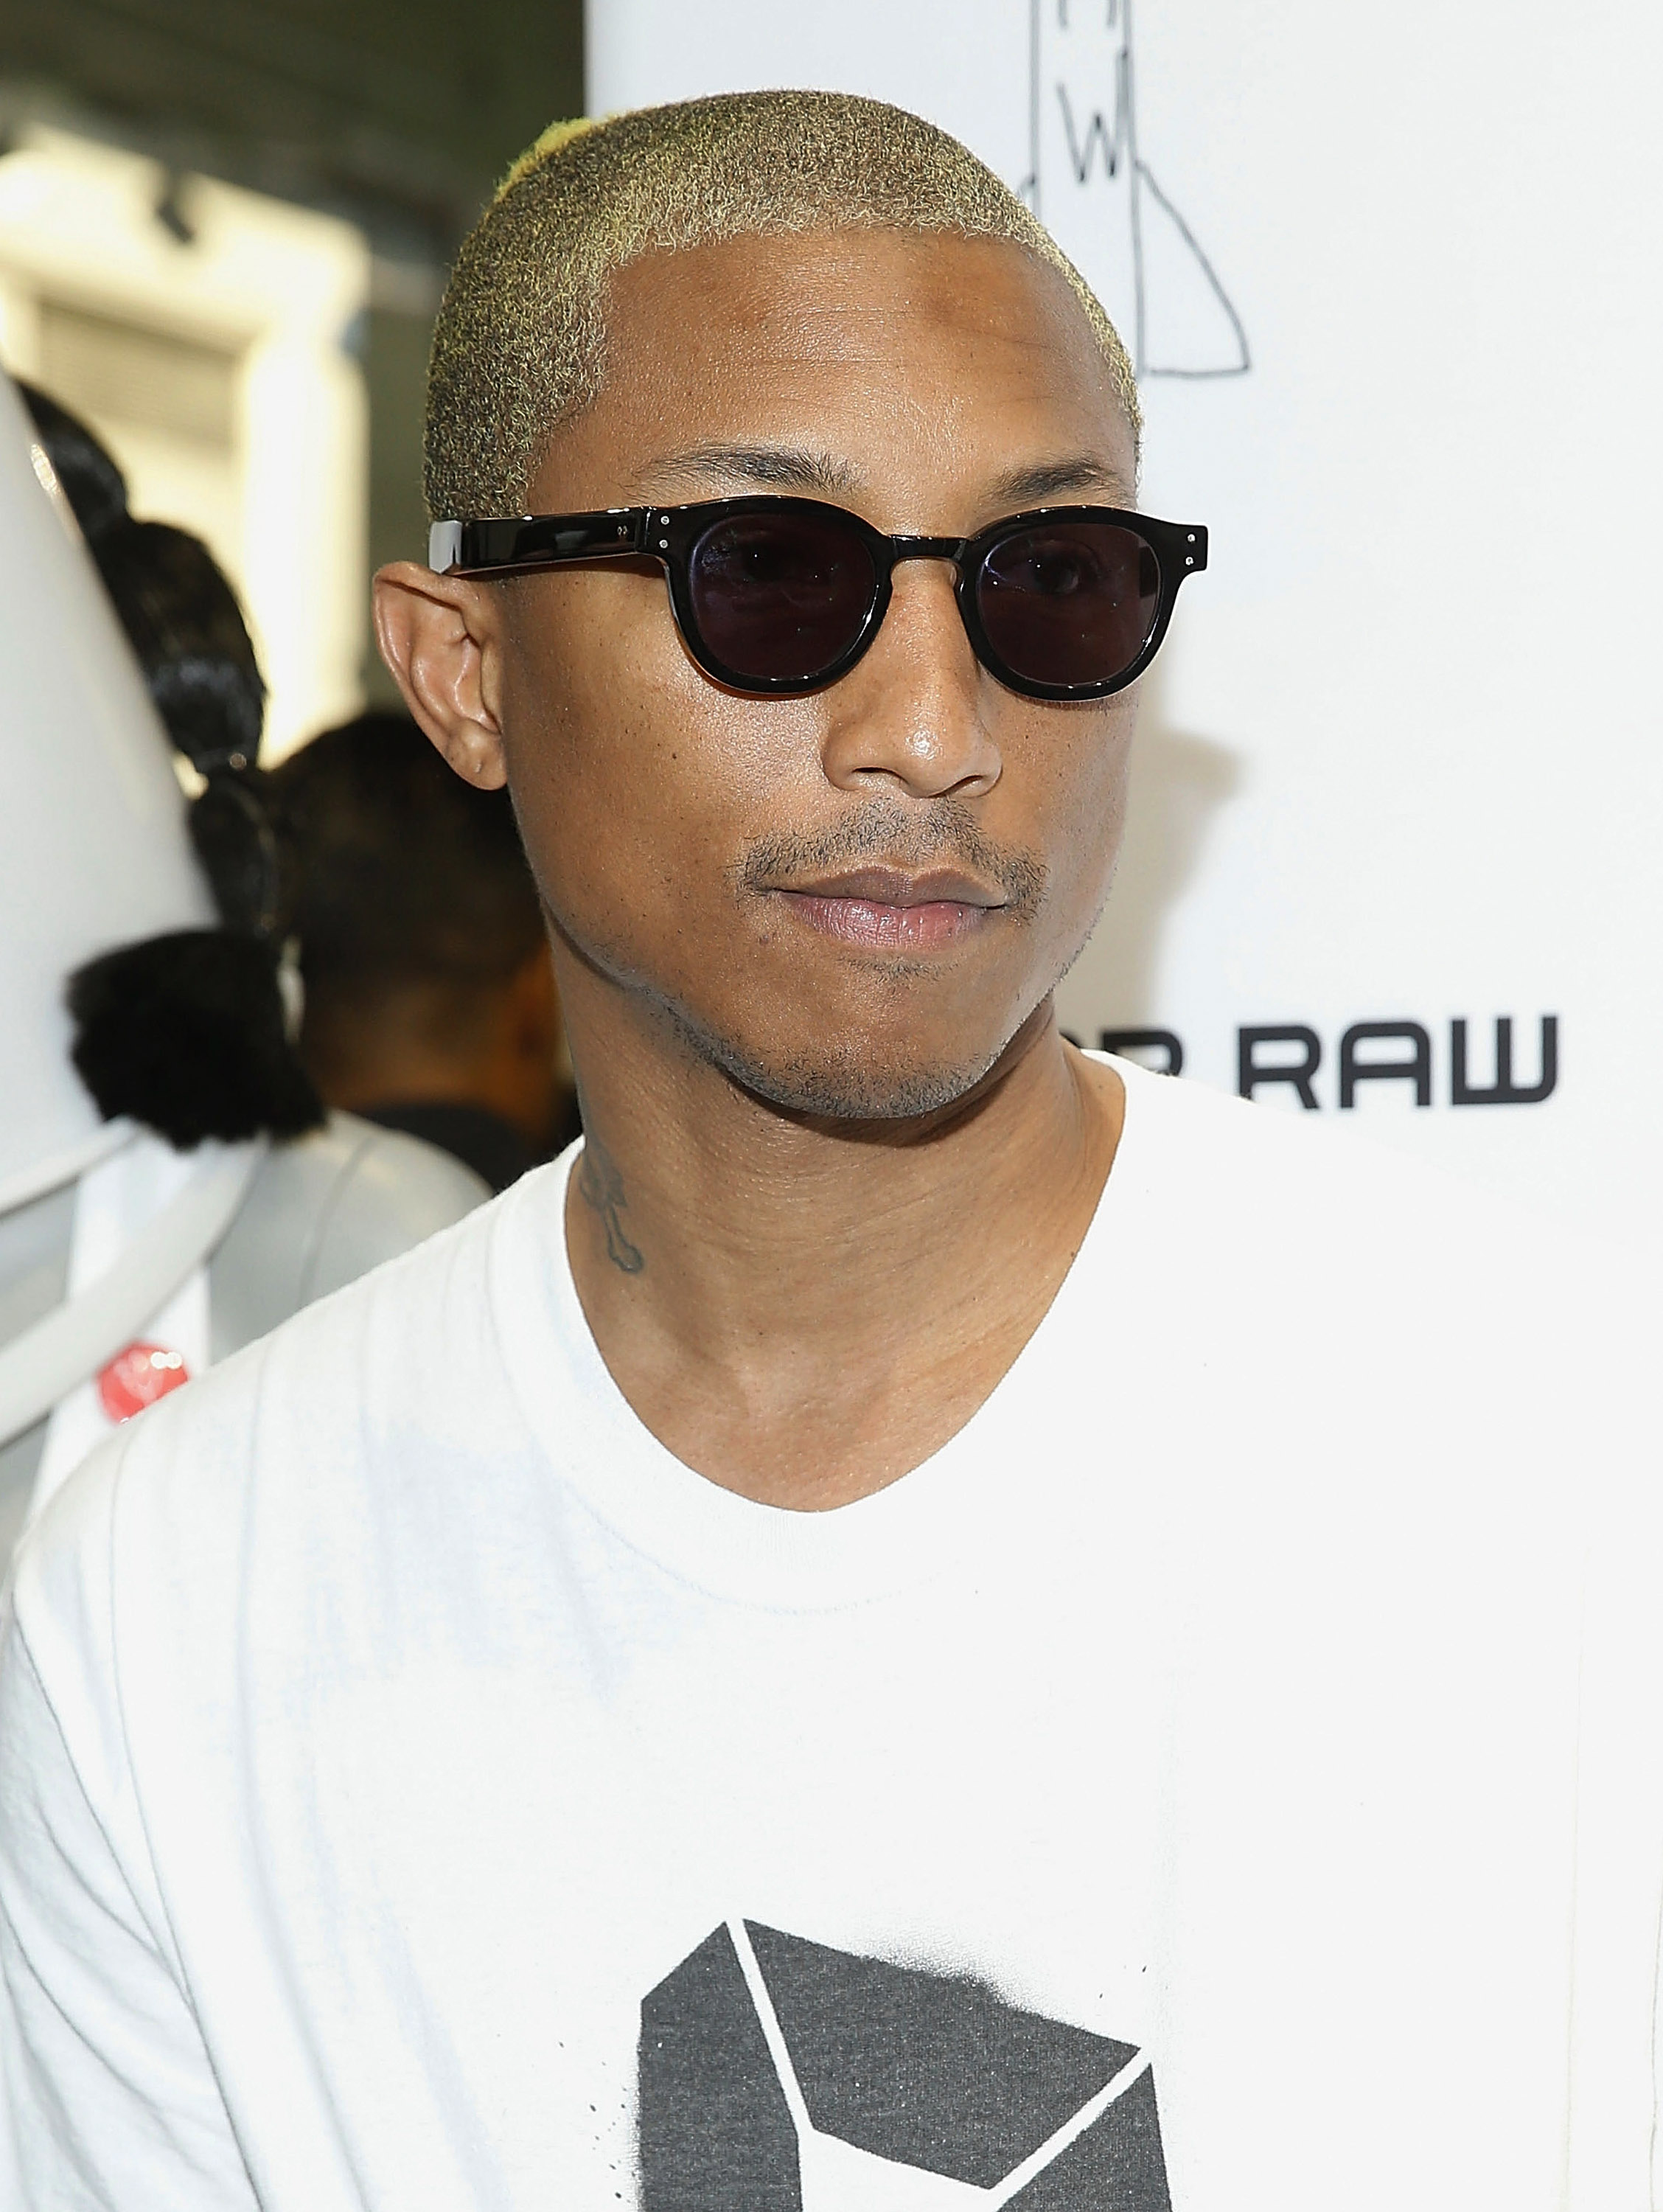 G-Star RAW Fifth Avenue Store Opening